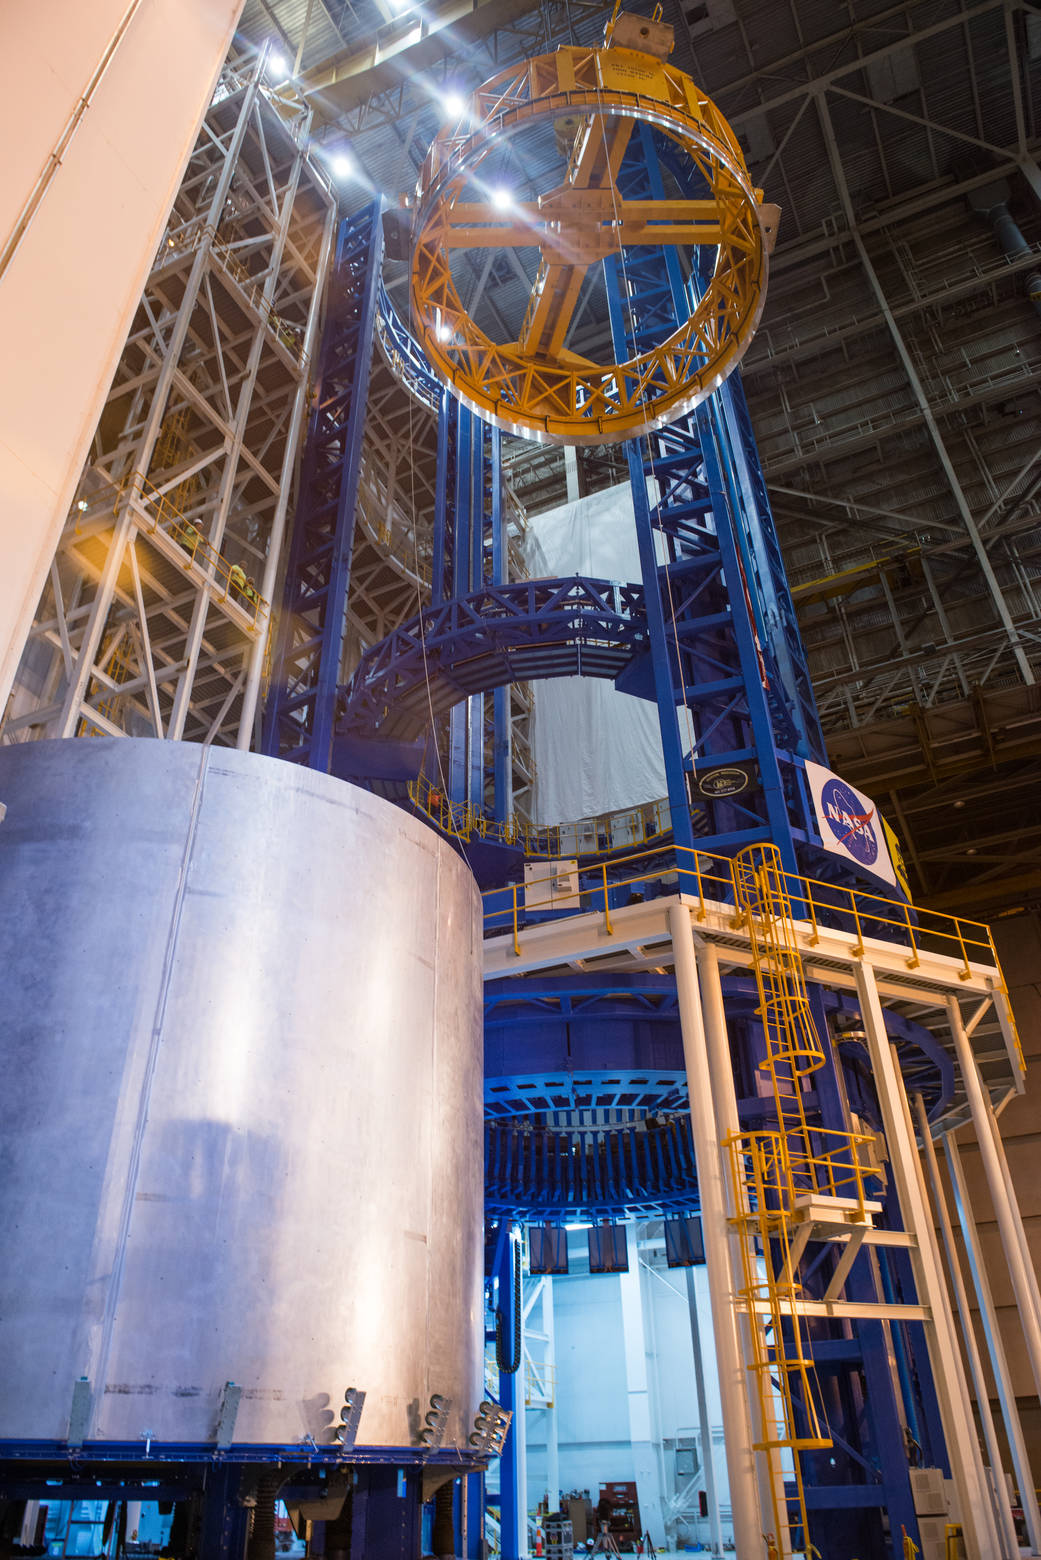 A ring and barrel recently loaded onto the Vertical Assembly Center at NASA’s Michoud Assembly Facility in New Orleans.